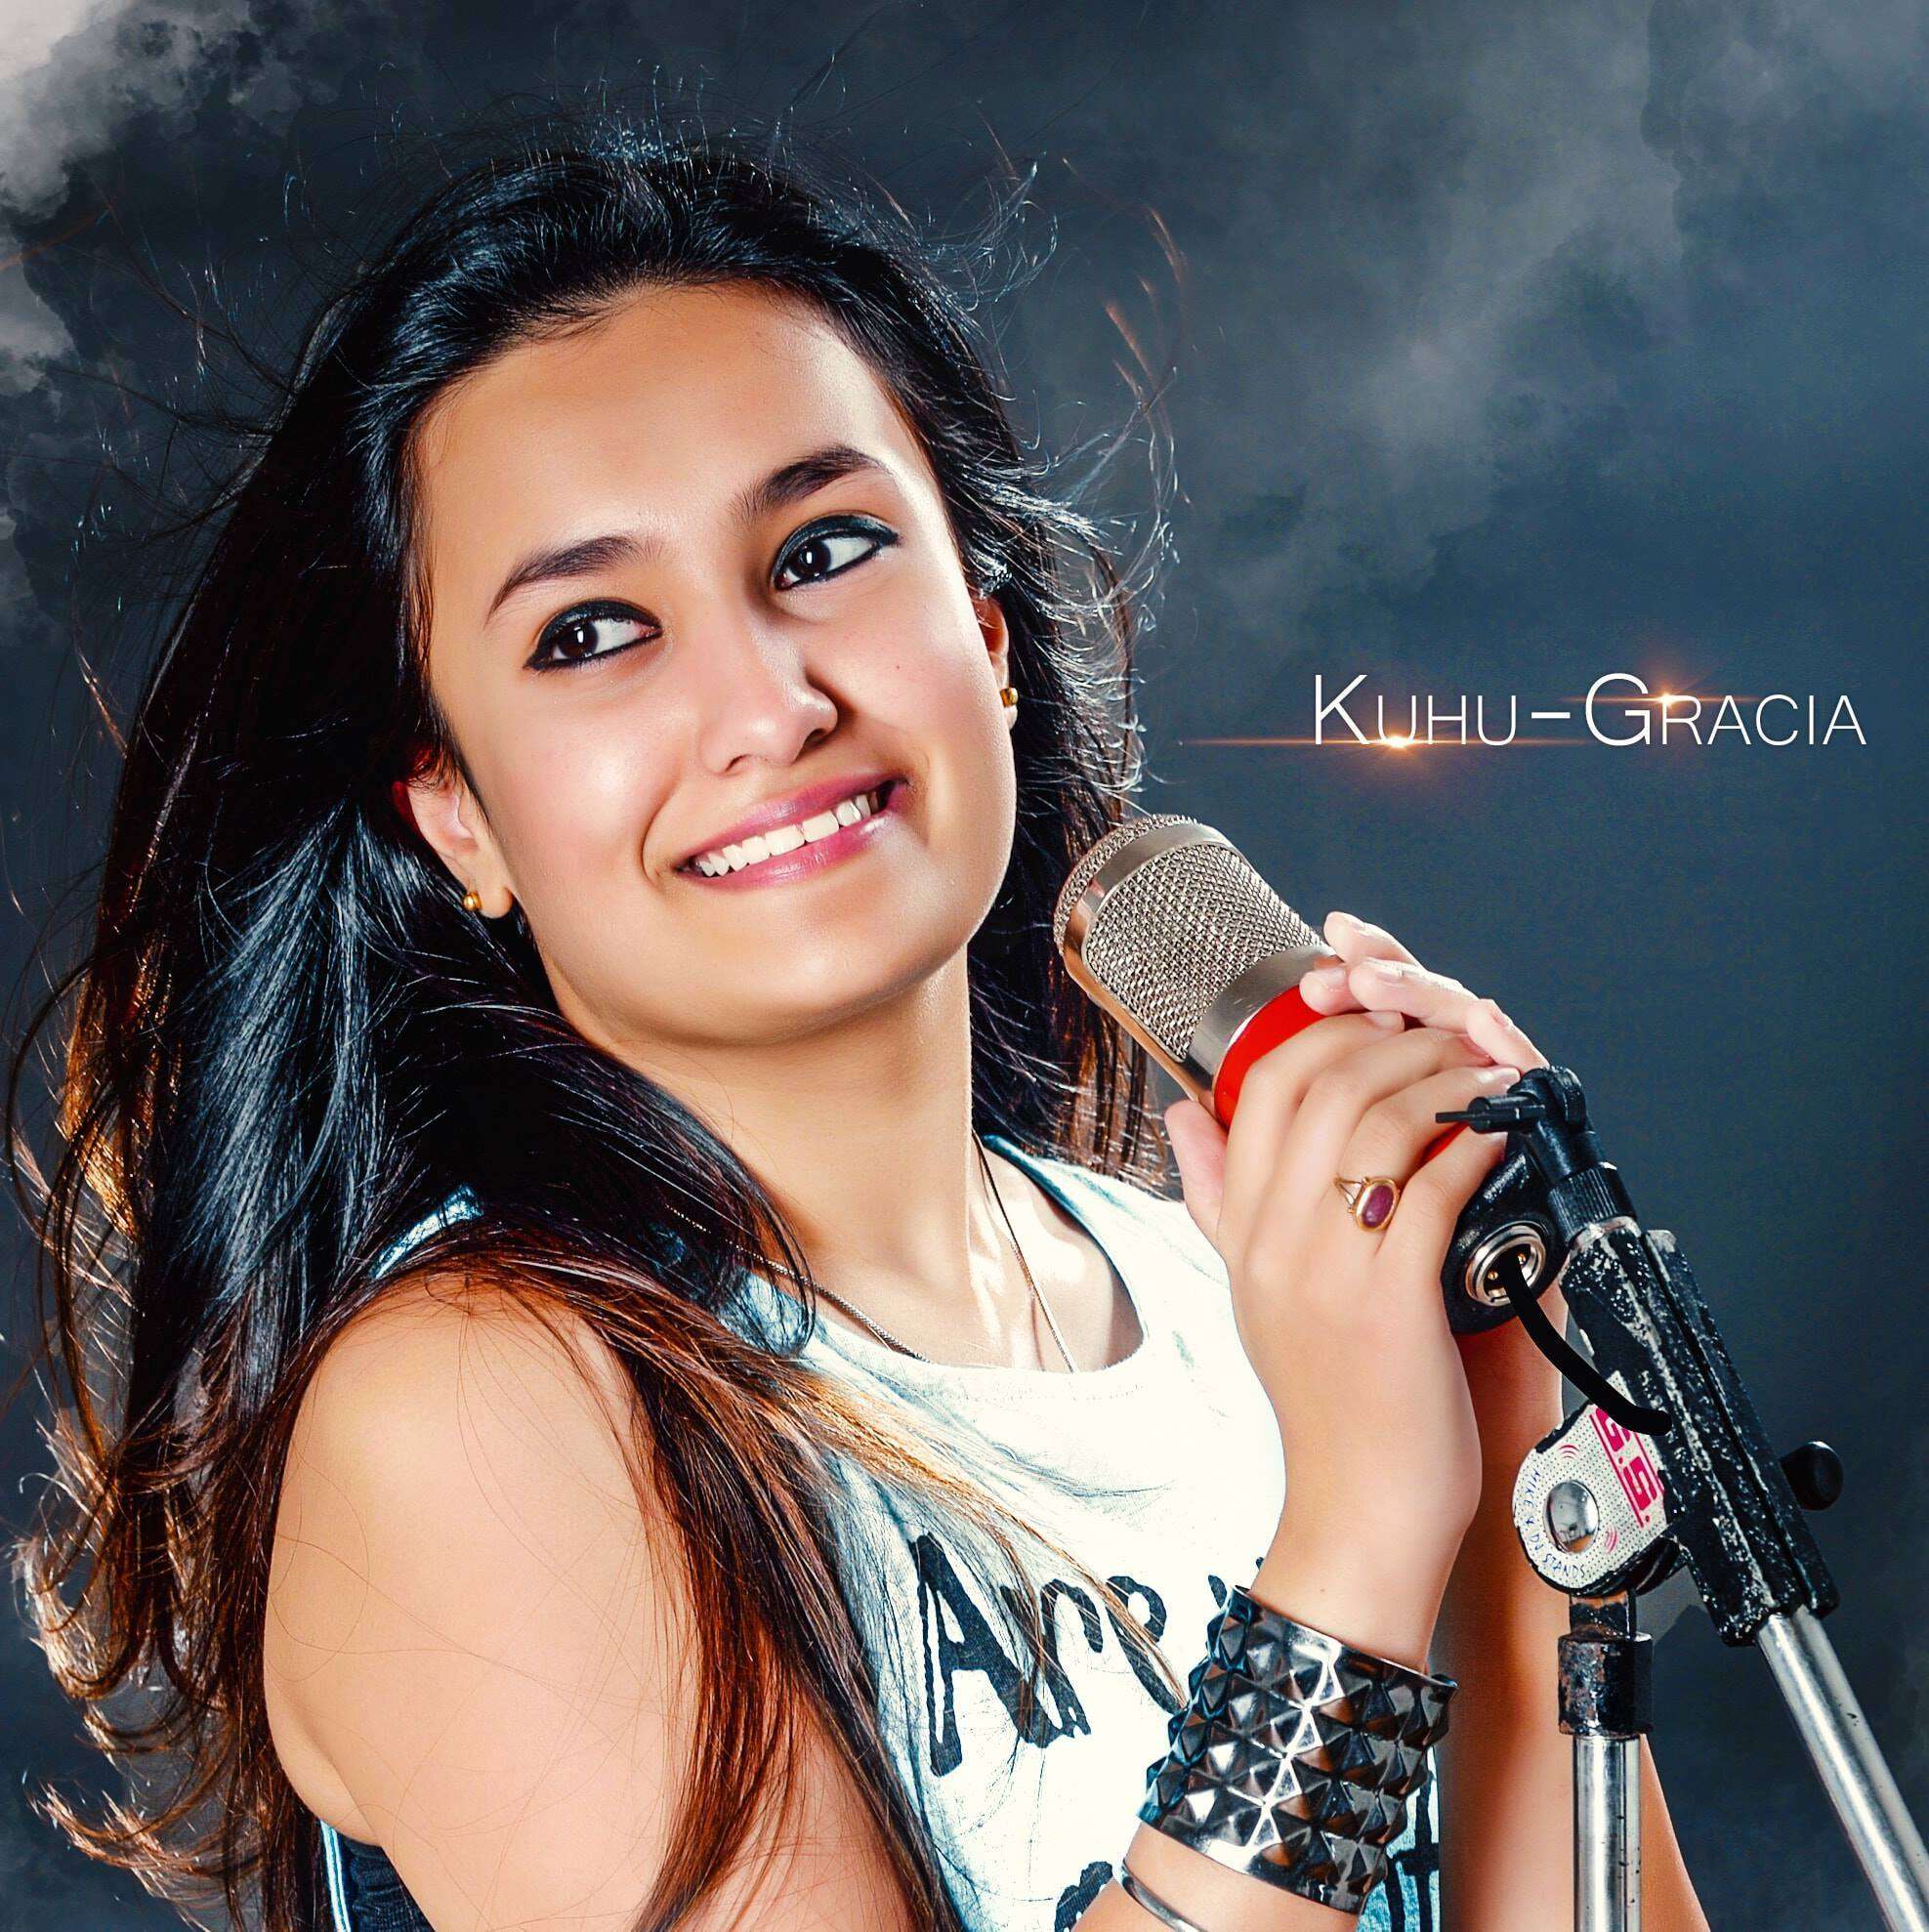 Kuhu Gracia Biography: Songs, Net Worth, Age, Wiki, Pictures, Boyfriend